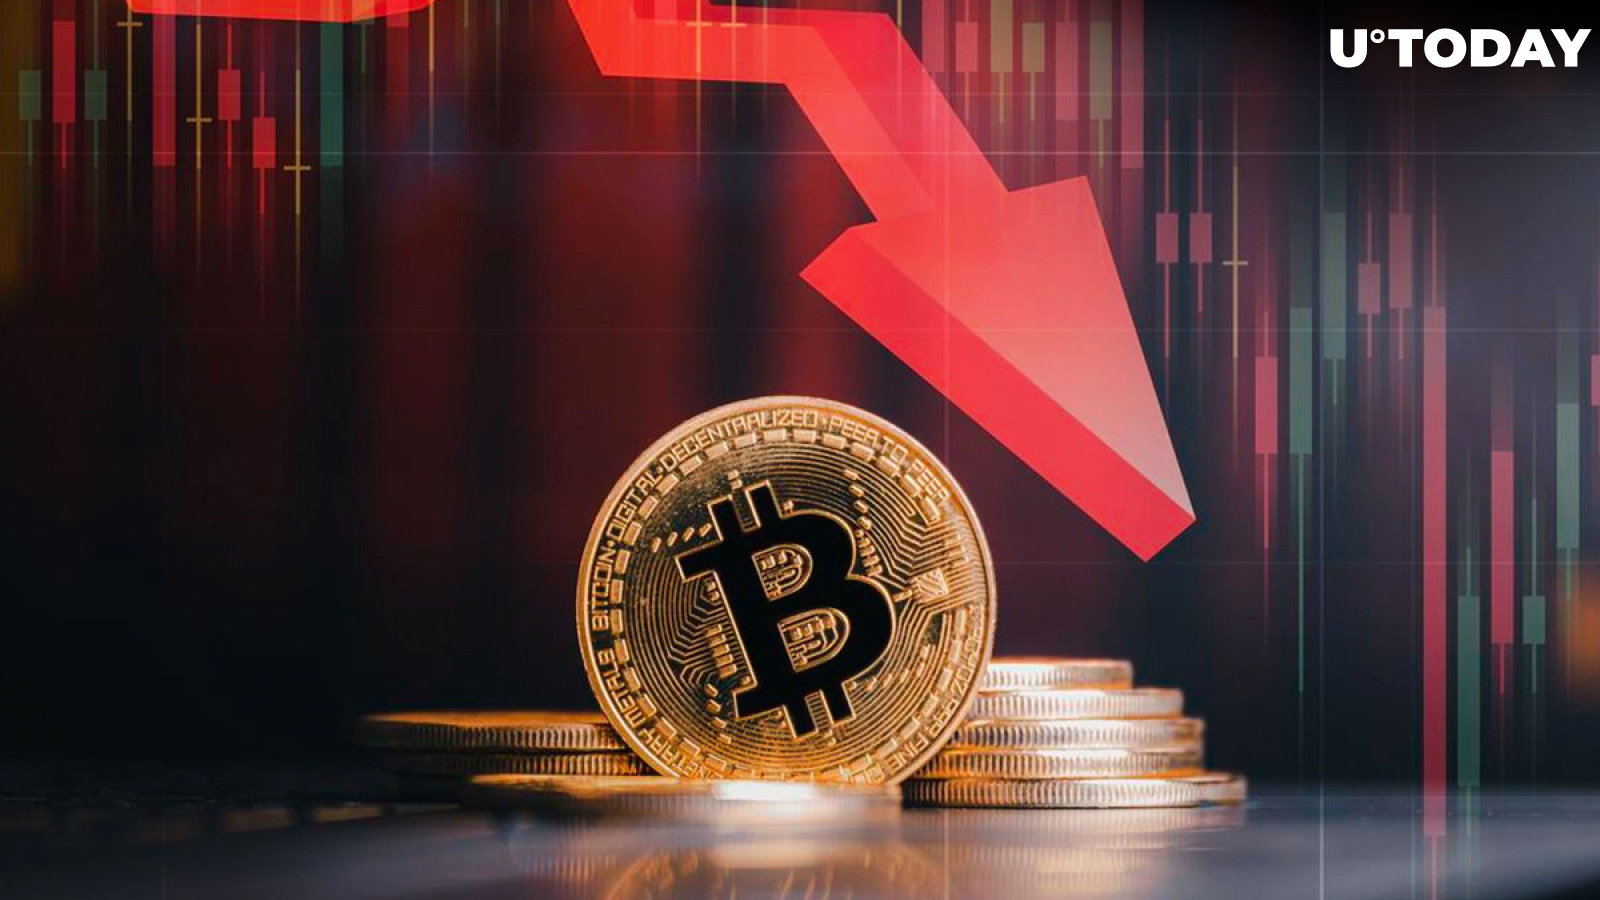 Bitcoin (BTC) Short-Term Holders' Supply Plunges to Cycle Low, Glassnode Says